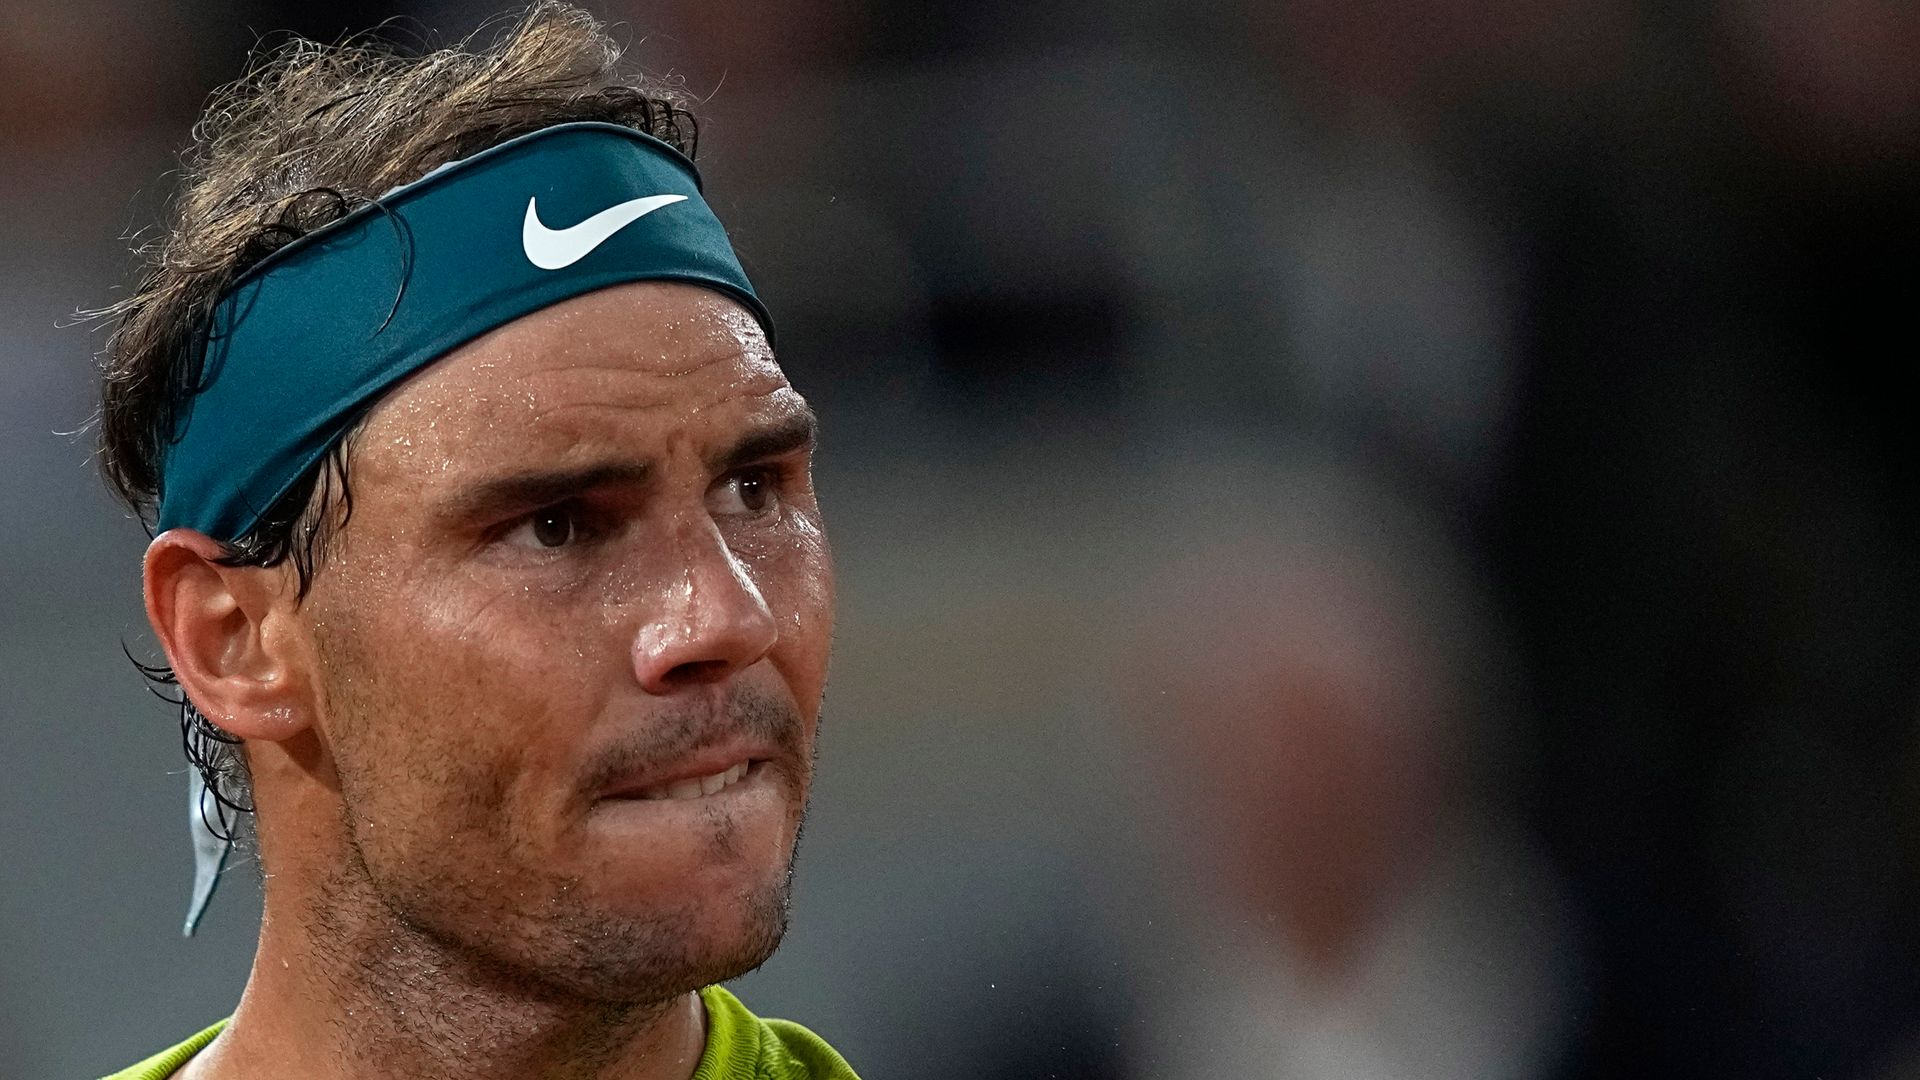 Nadal through to French Open final after Zverev injury